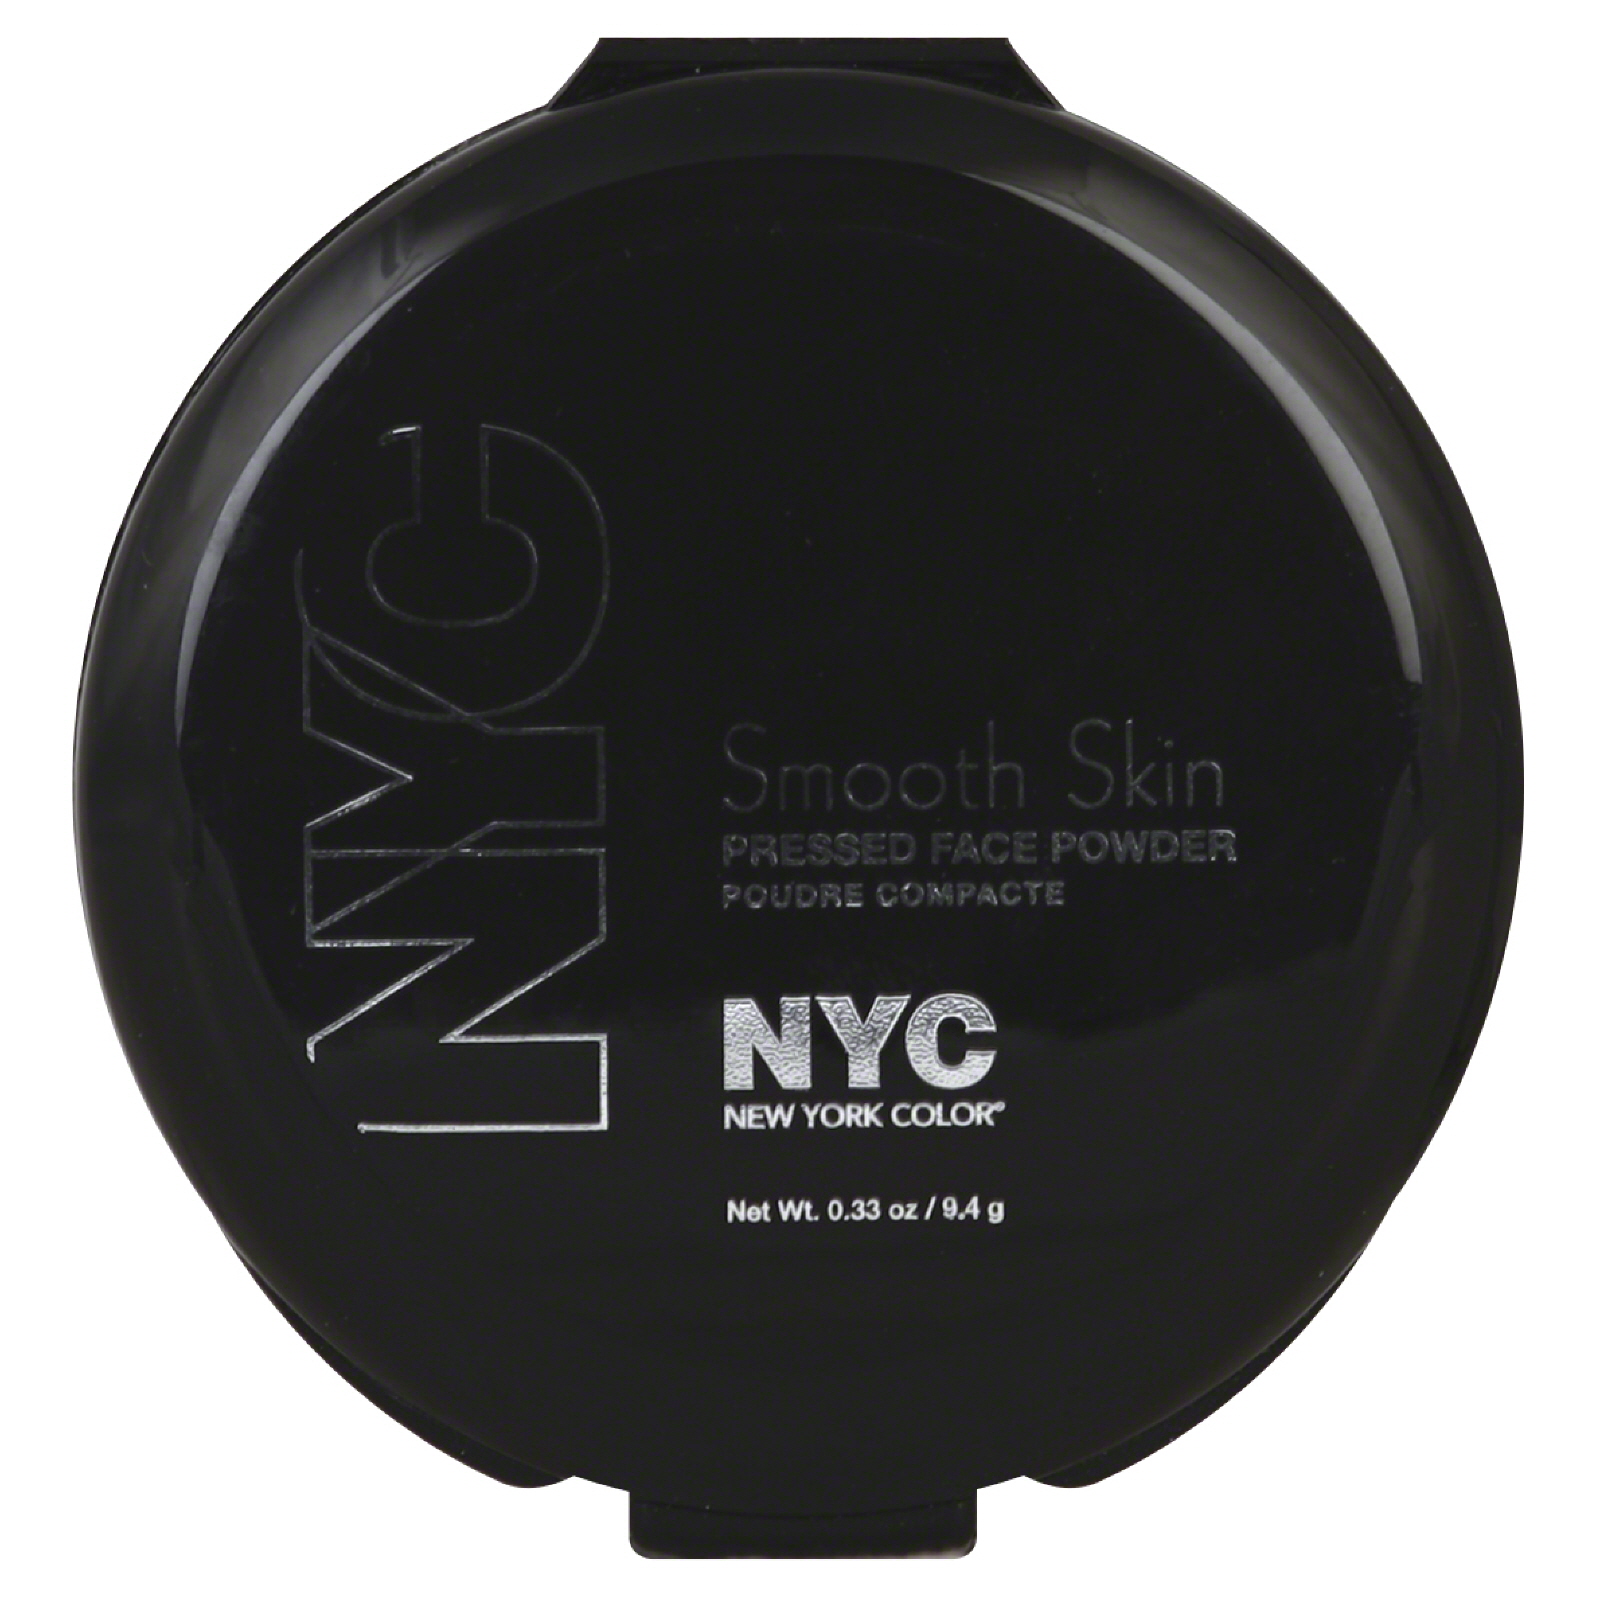 New York Color Face Powder Pressed Smooth Skin